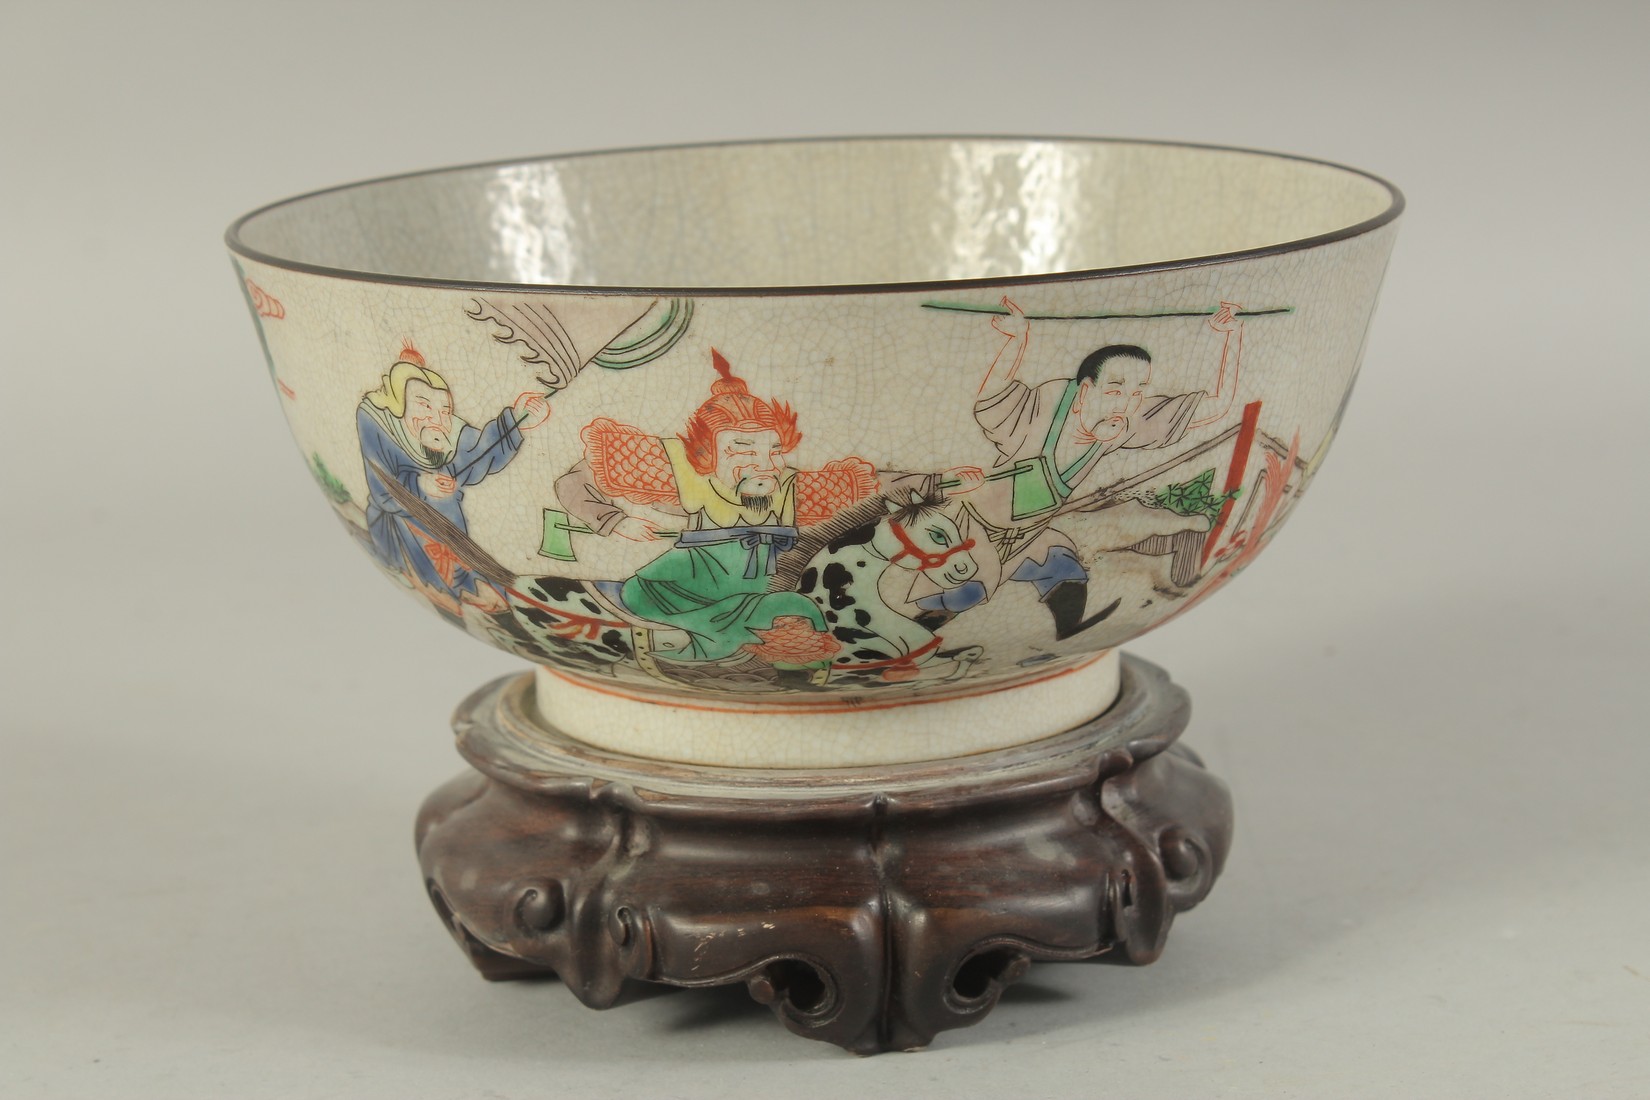 A CHINESE FAMILLE VERTE PORCELAIN BOWL - possibly Qing dynasty, with hardwood stand, the exterior - Image 4 of 7